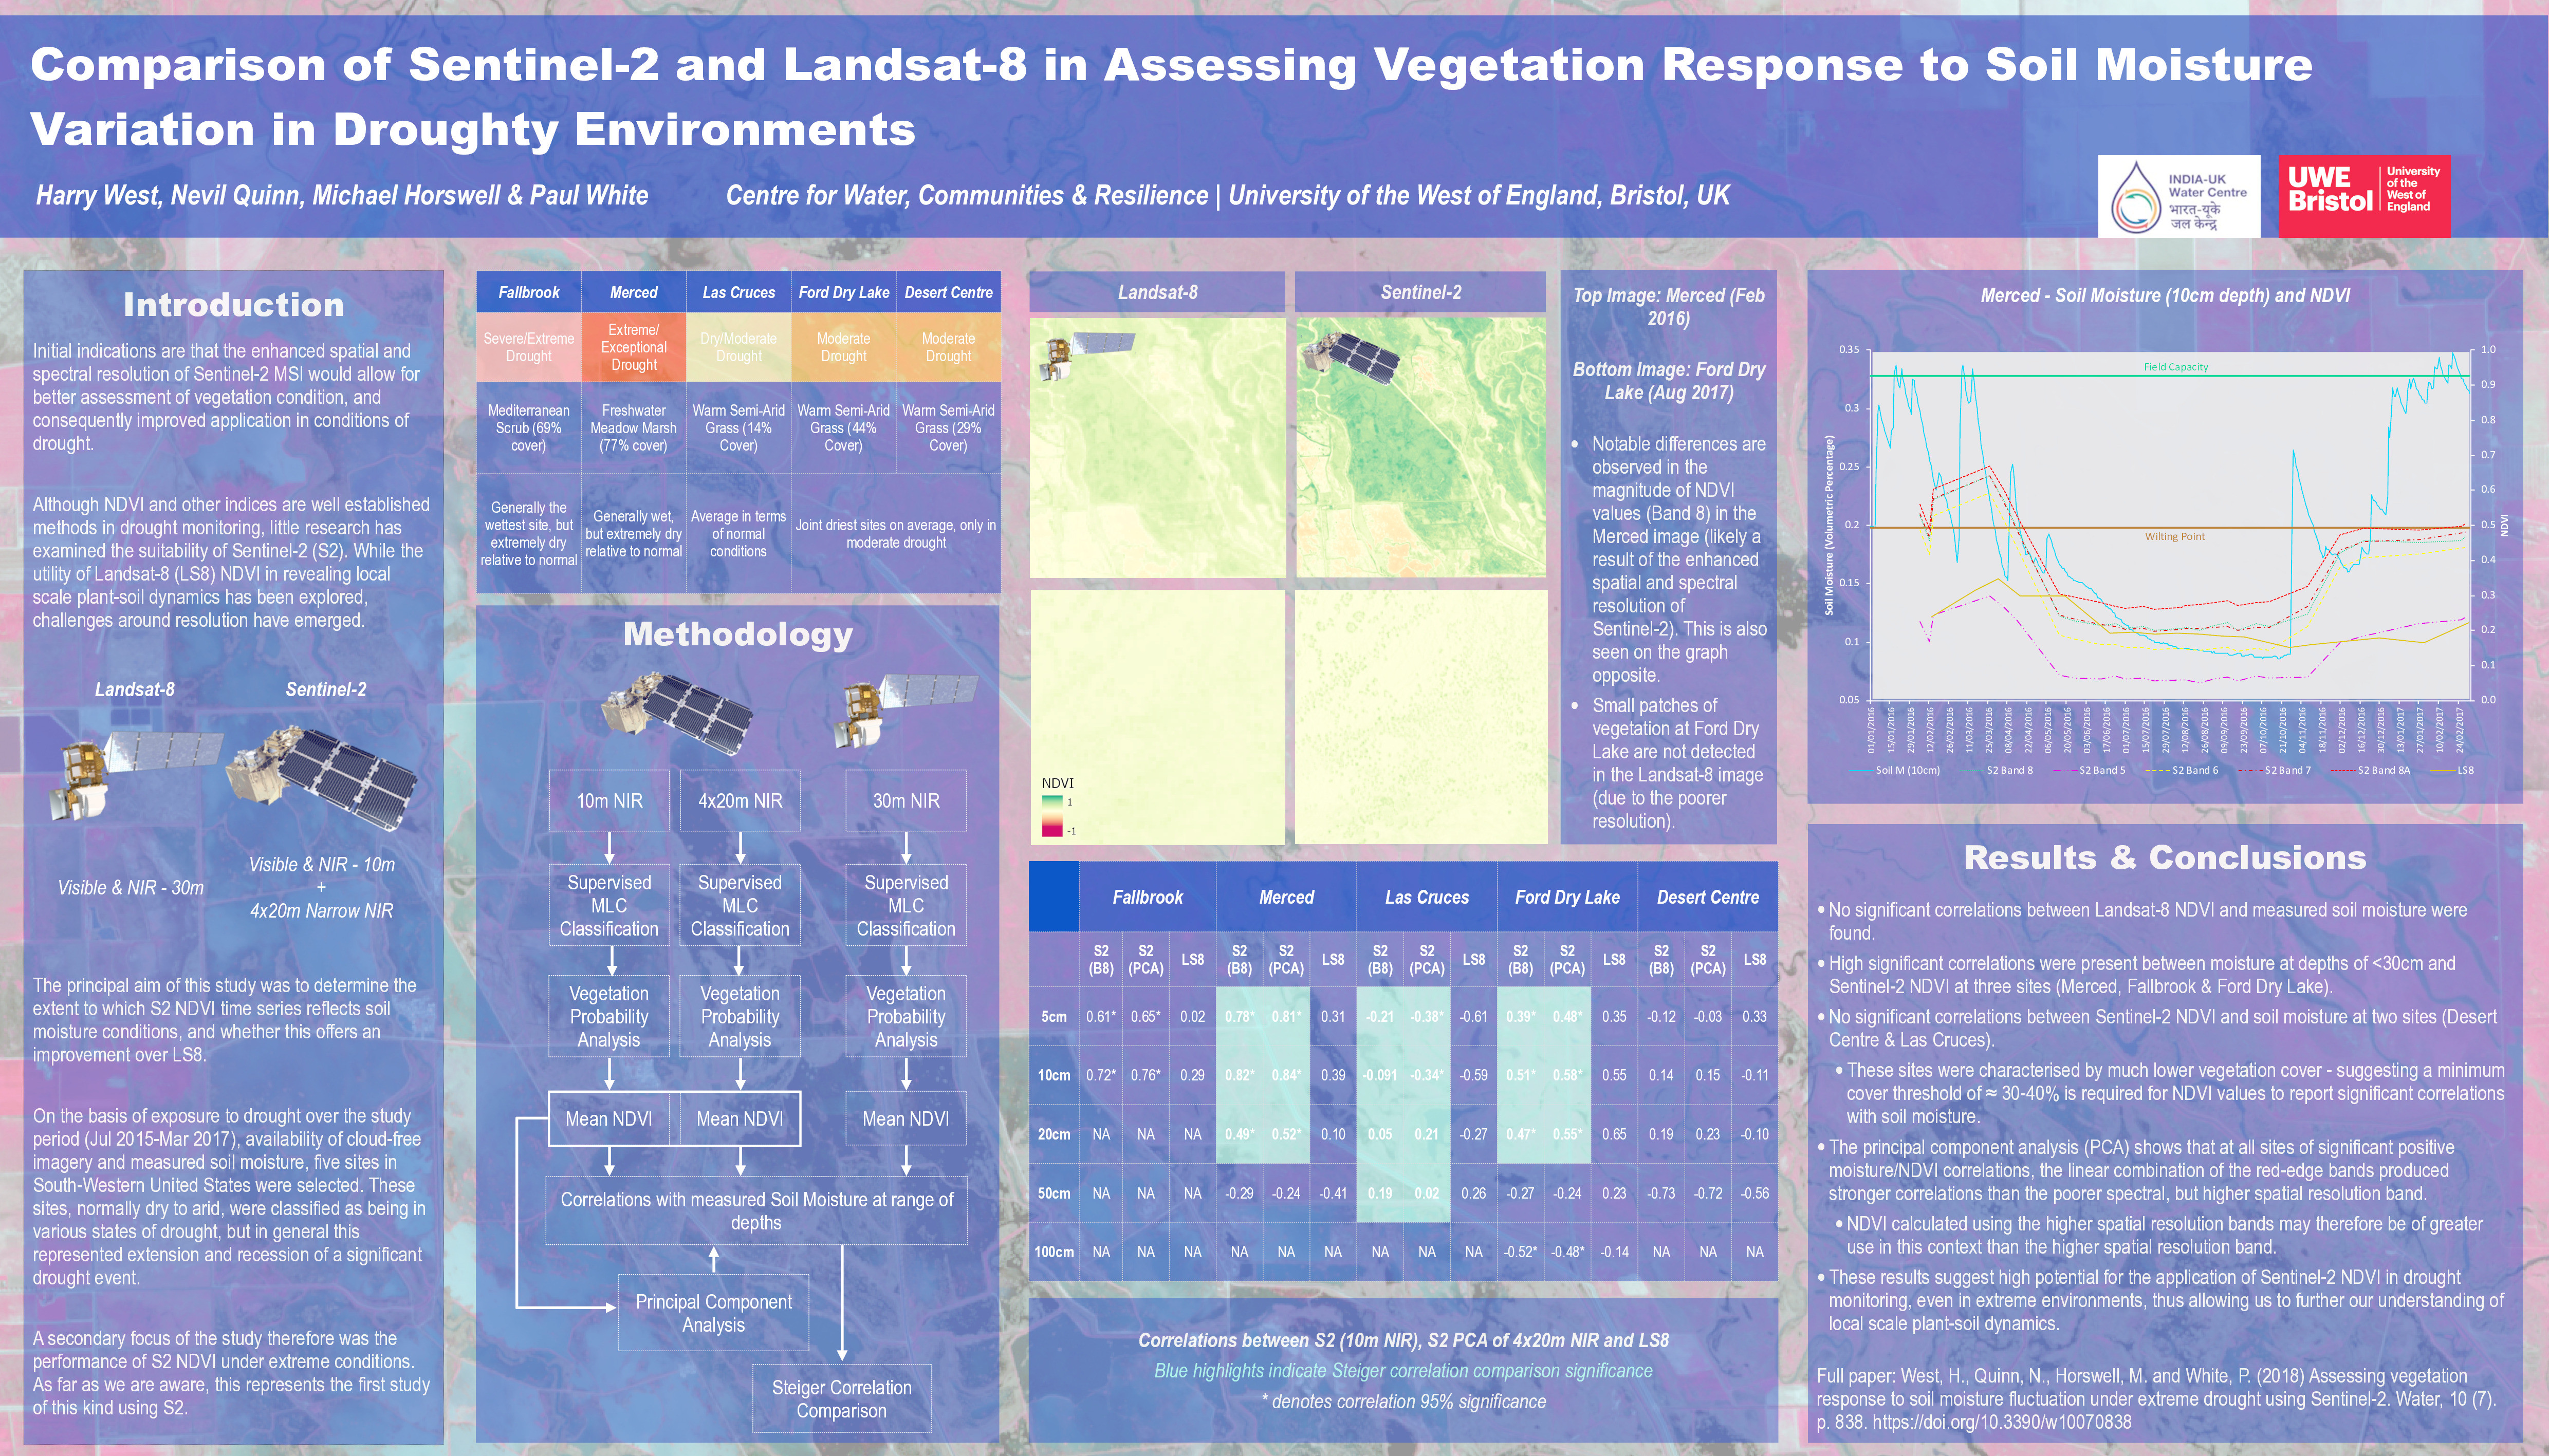 Comparison of Sentinel-2 and Landsat-8 in assessing vegetation response to soil moisture variation in droughty environments Thumbnail